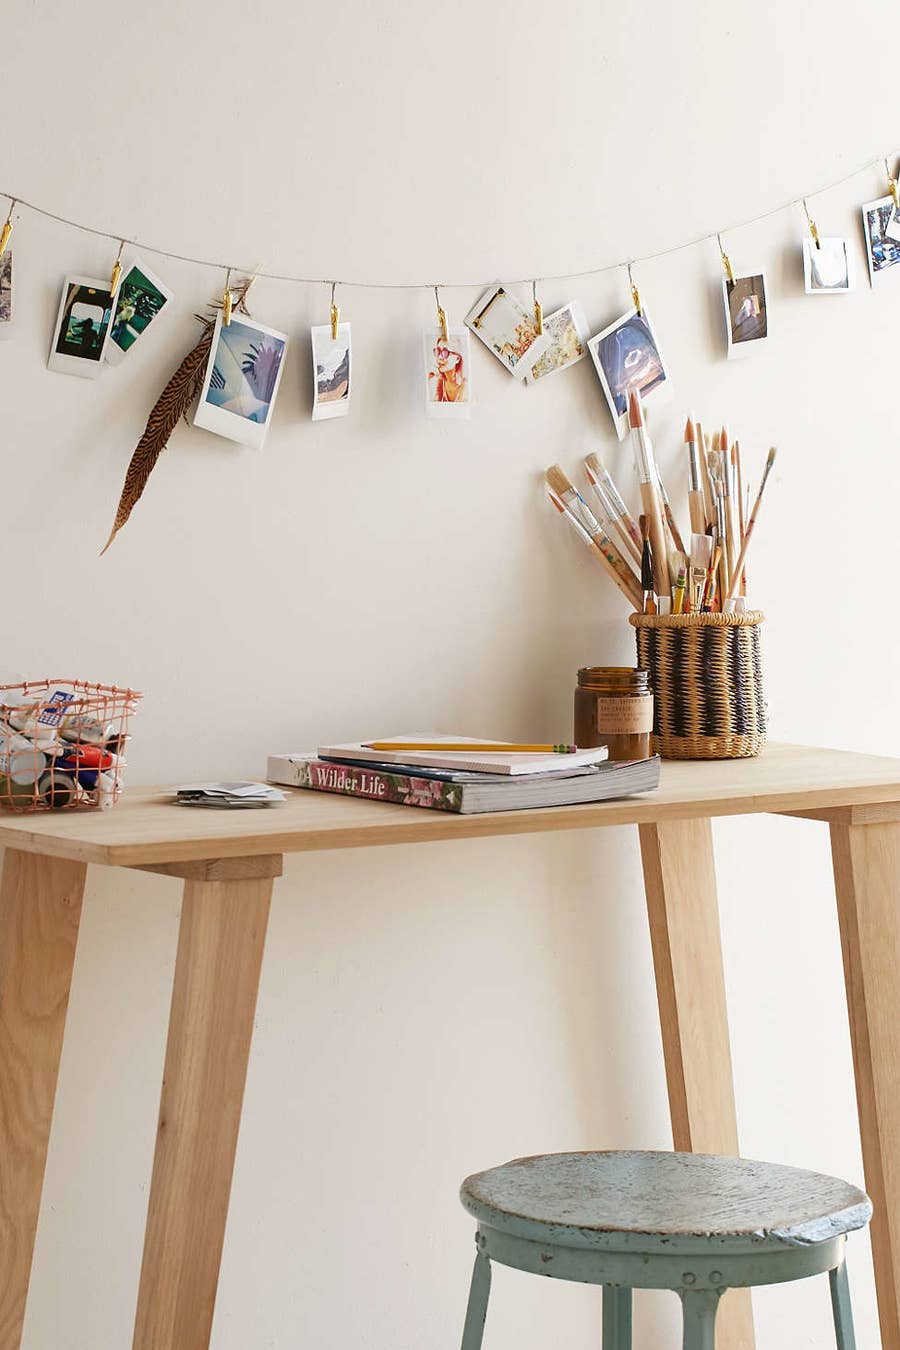 25 Great Accessories to Completely Transform Your Cubicle